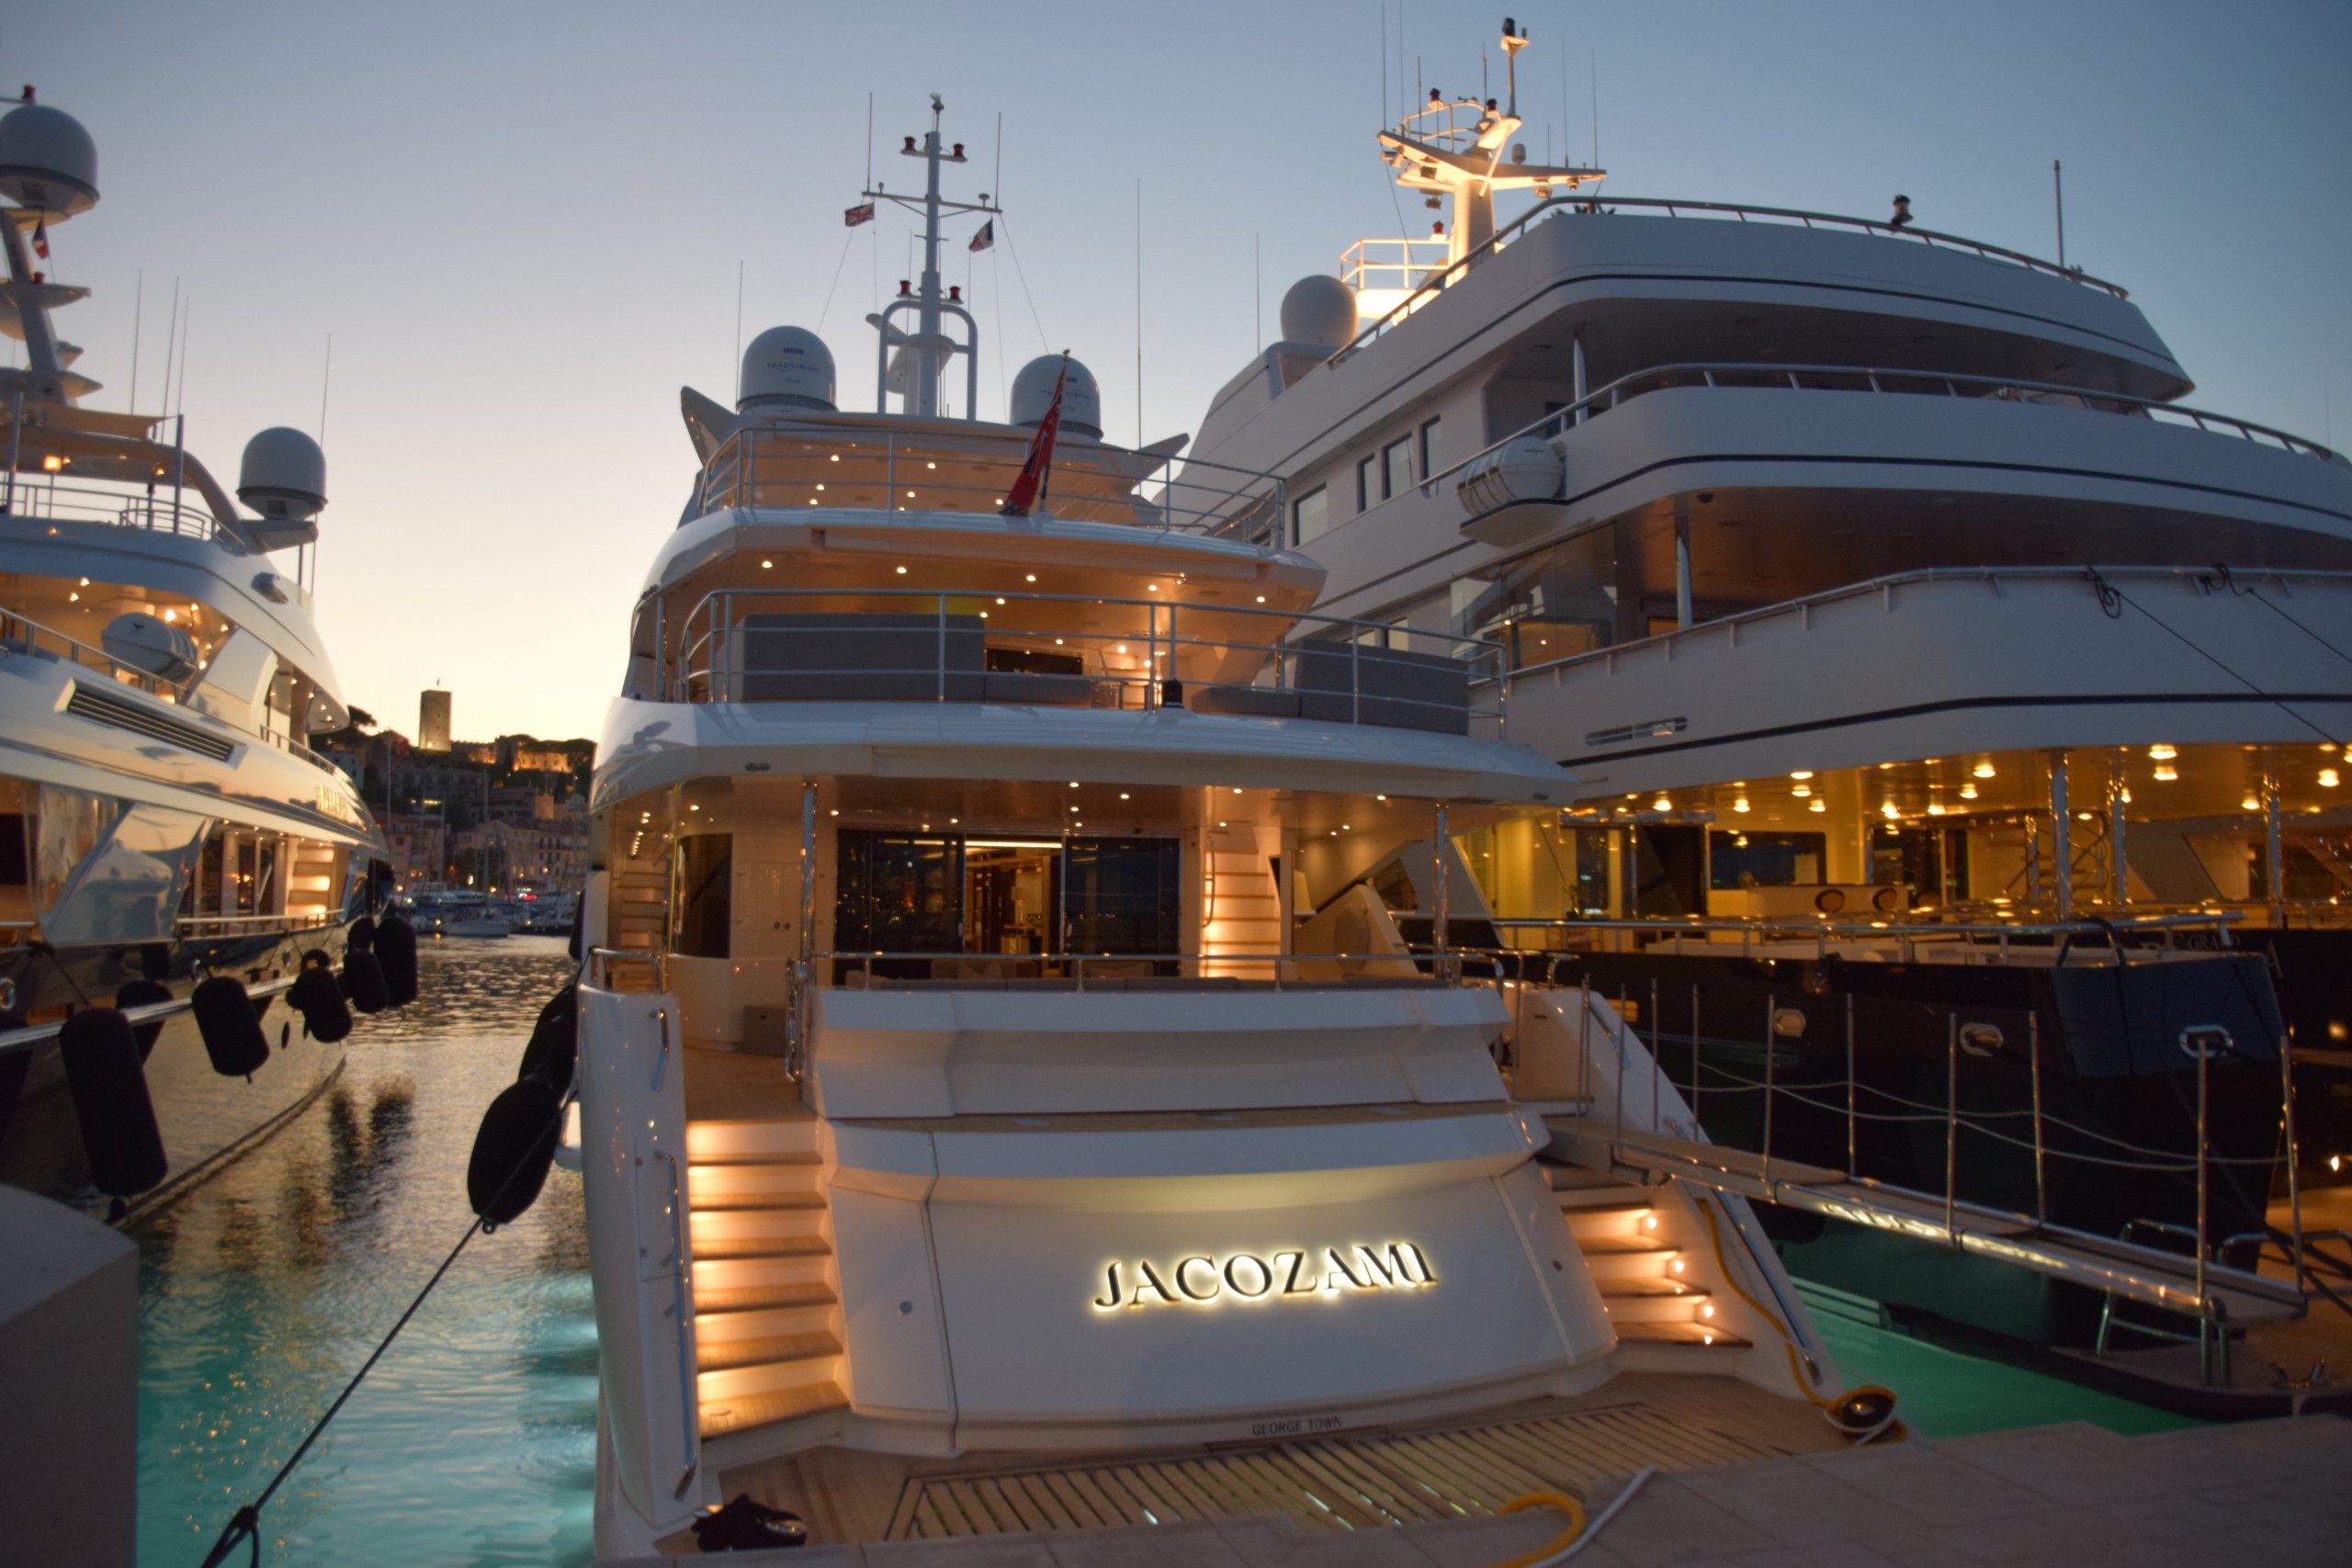 Jacozami Yacht • Benetti • 2020 • For Sale - For Charter